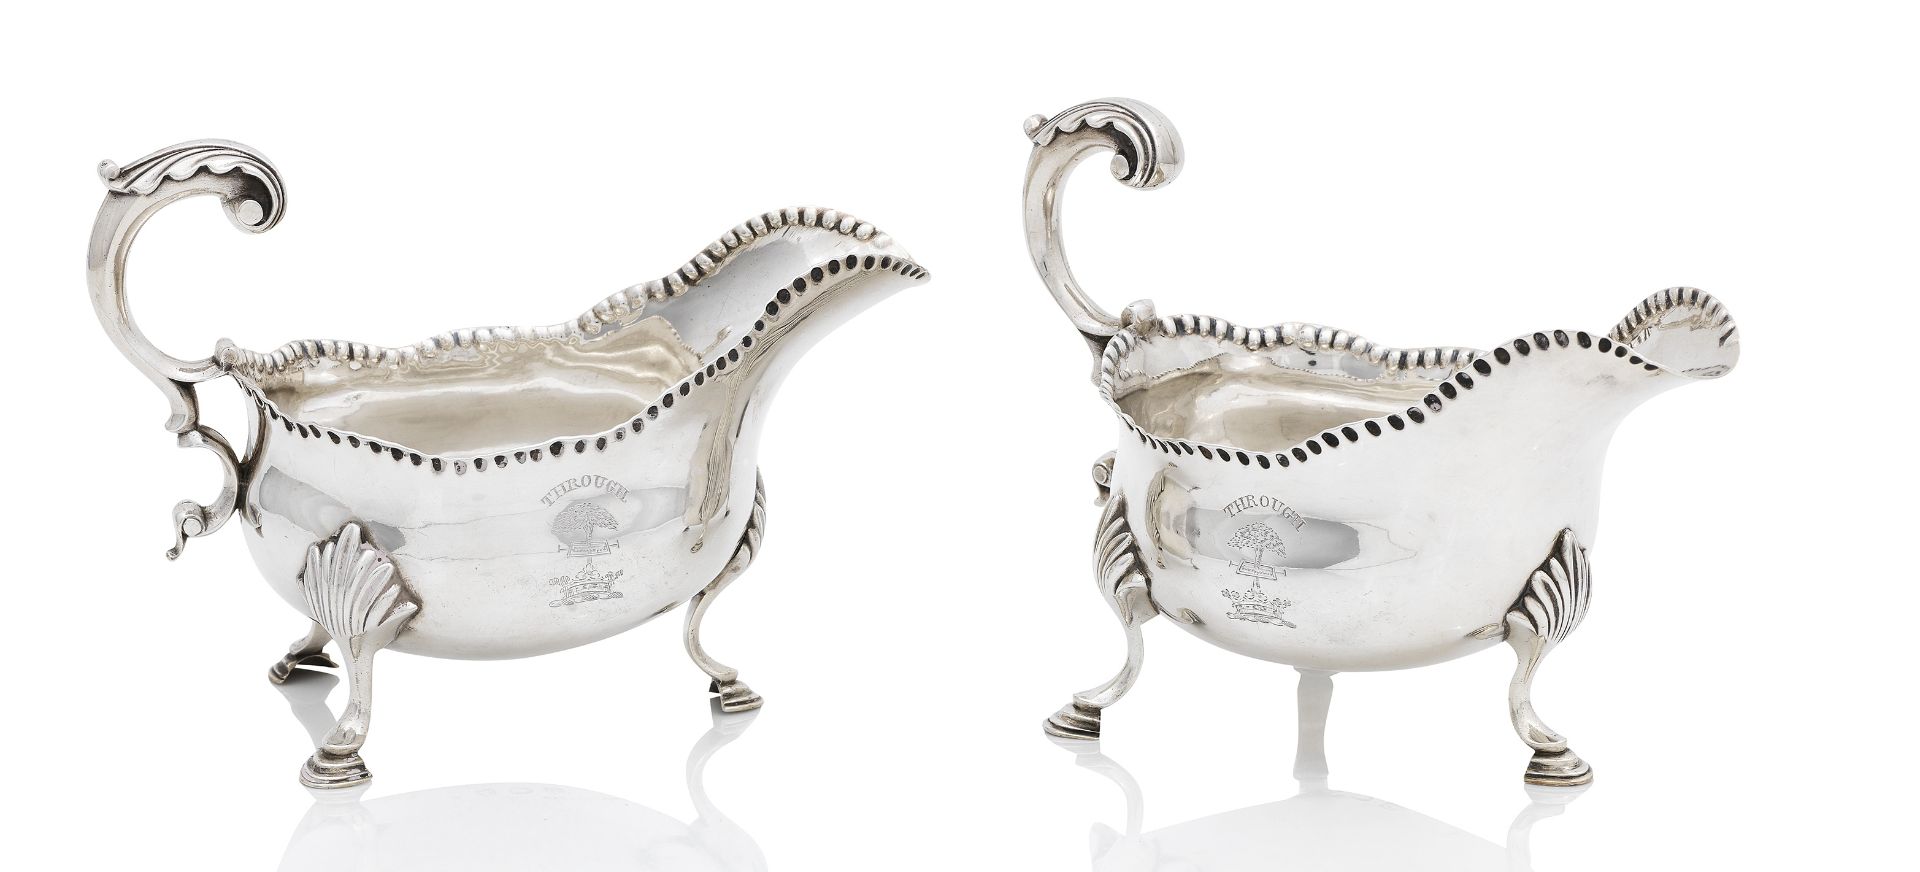 A pair of George III silver sauceboats maker's mark indistinct, London 1770